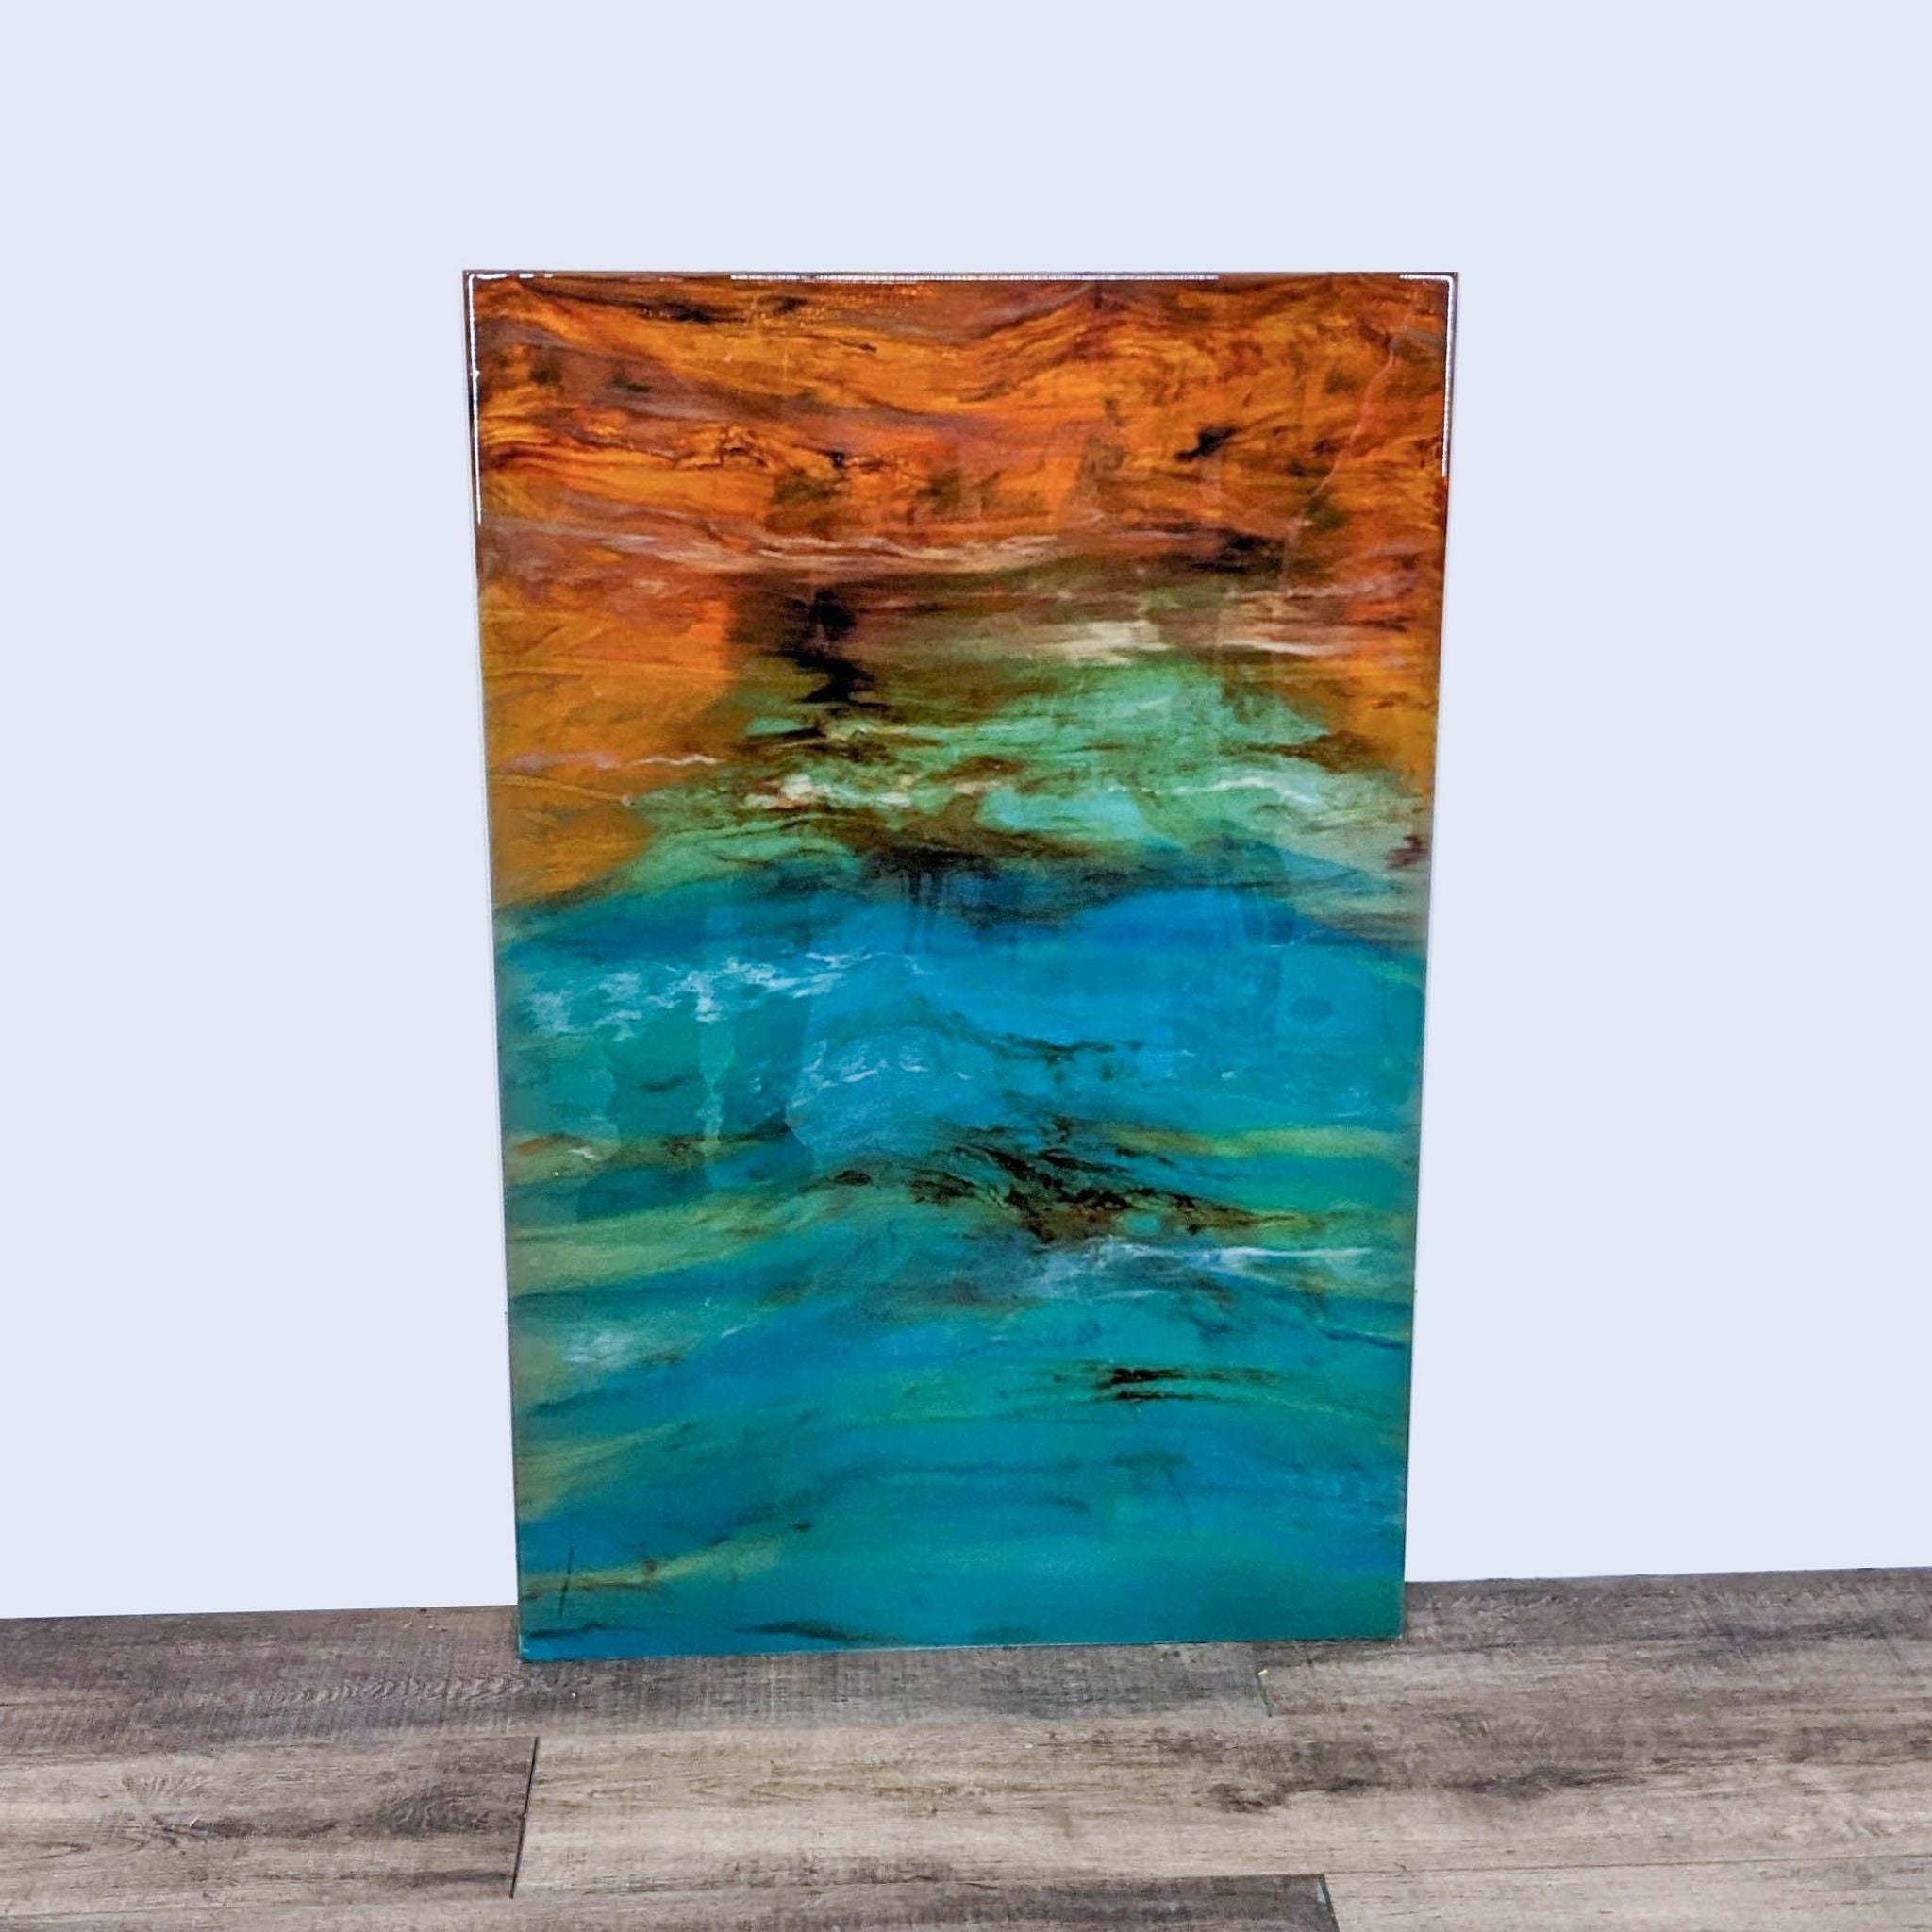 Abstract art print with vibrant gradient from teal to amber, displayed on a wooden floor against a plain background.